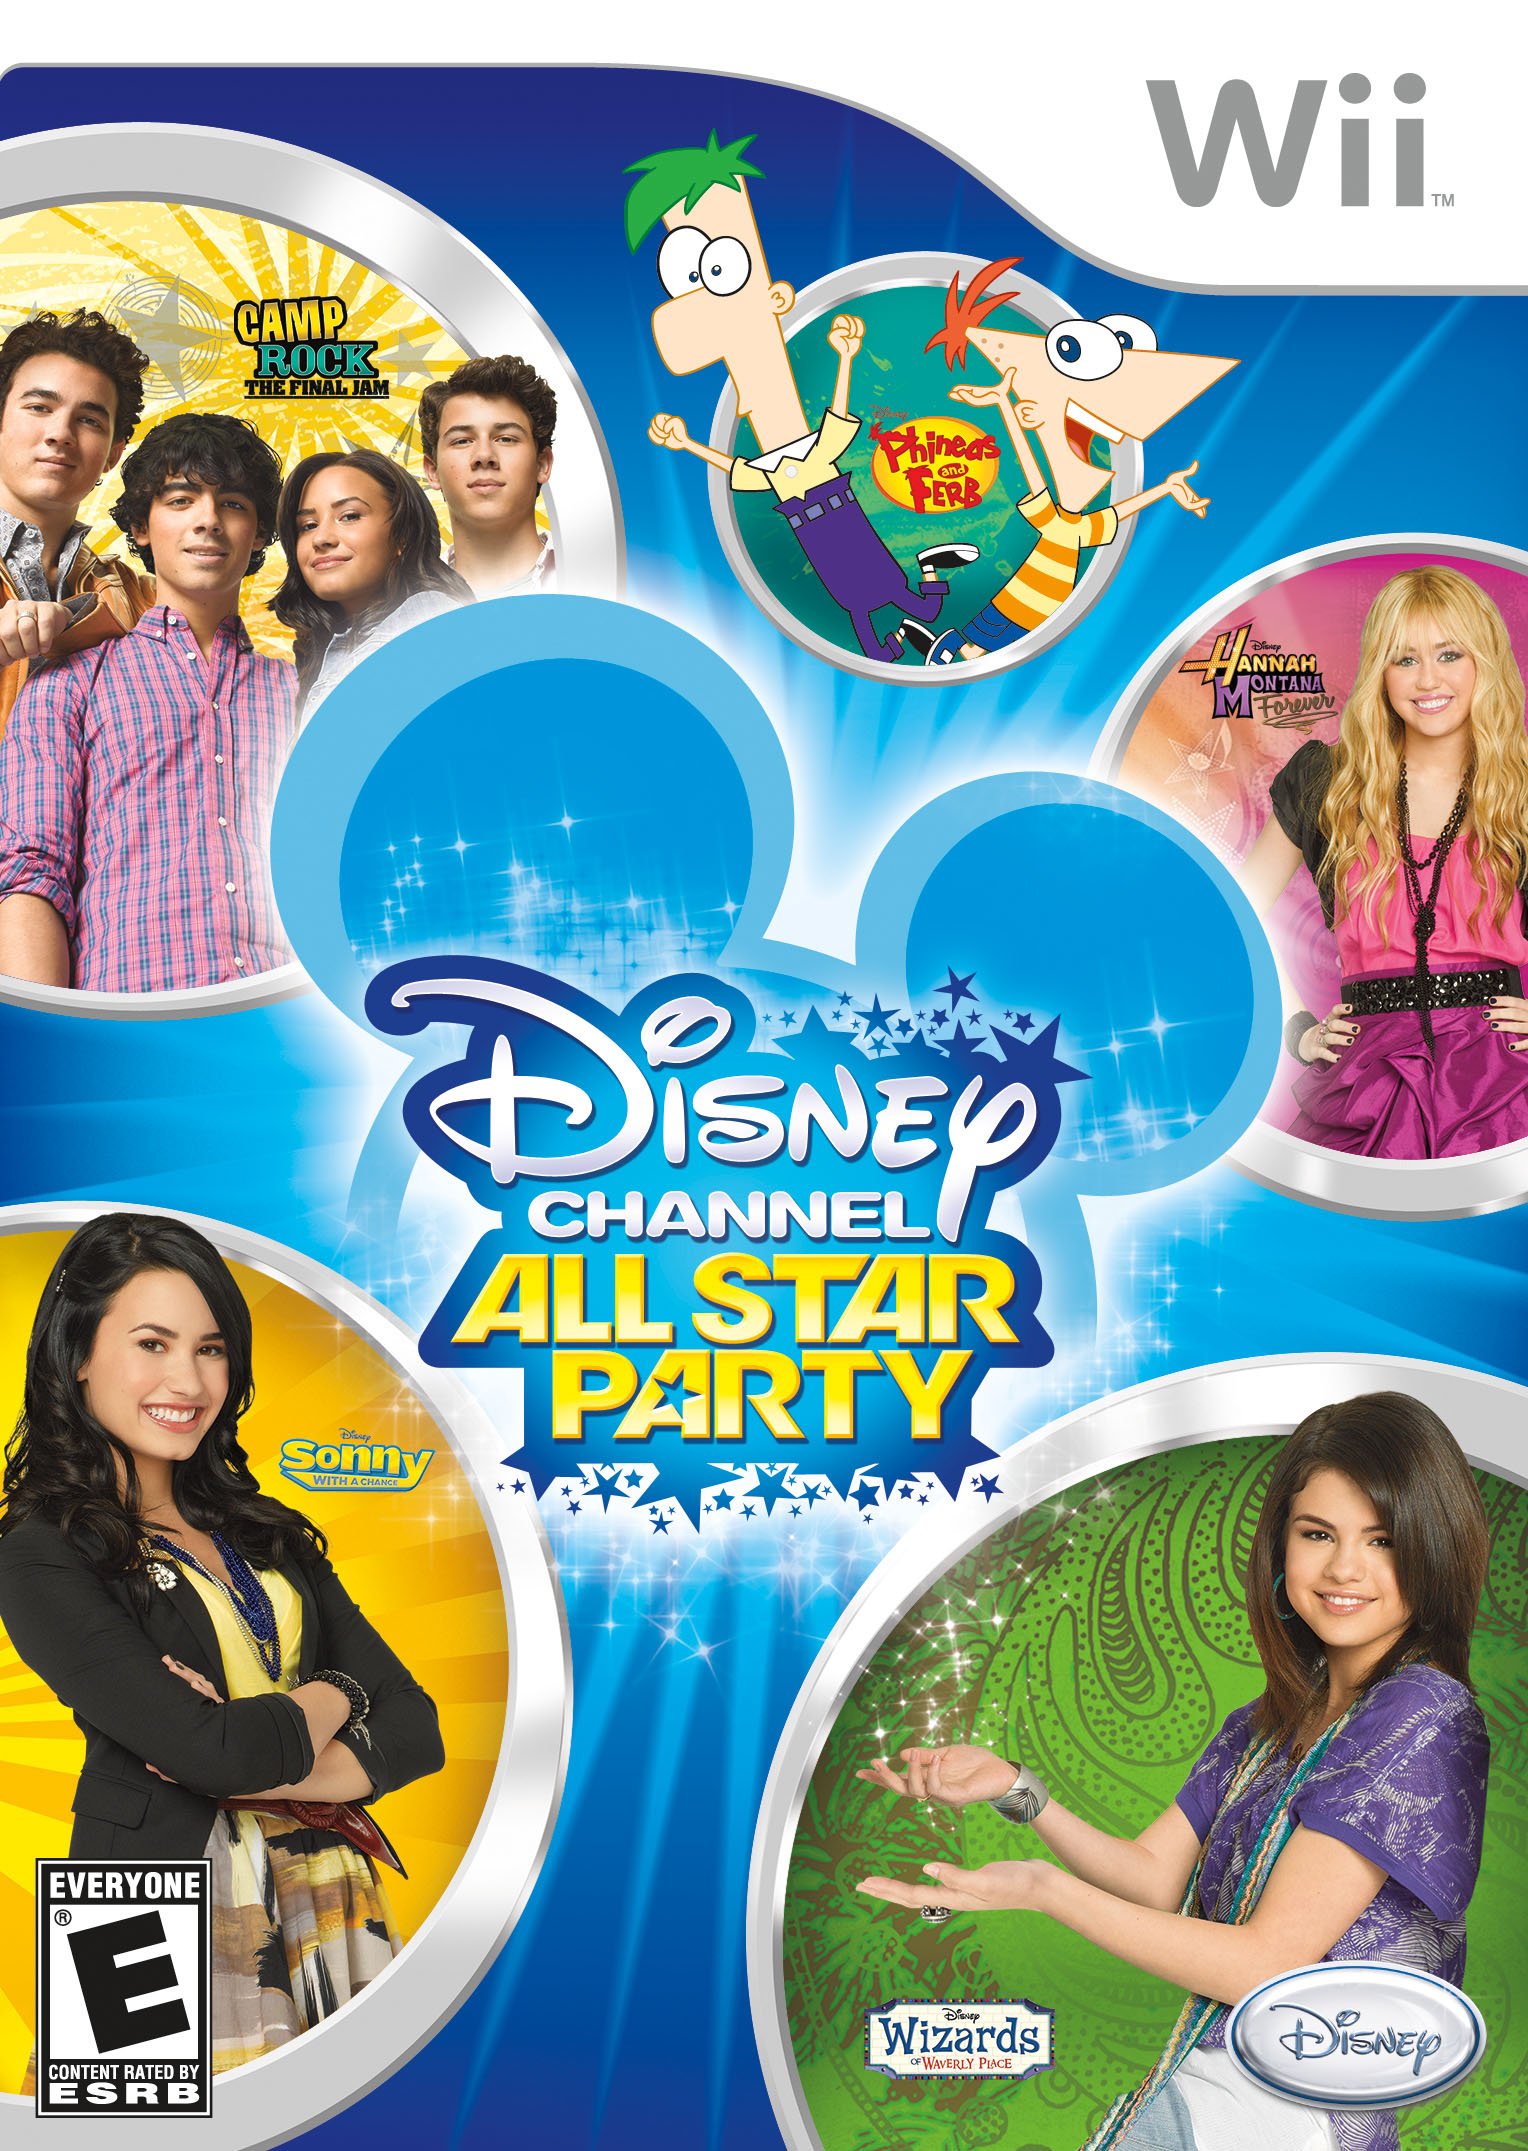 Disney Channel All Star Party (Wii) - image 1 of 2